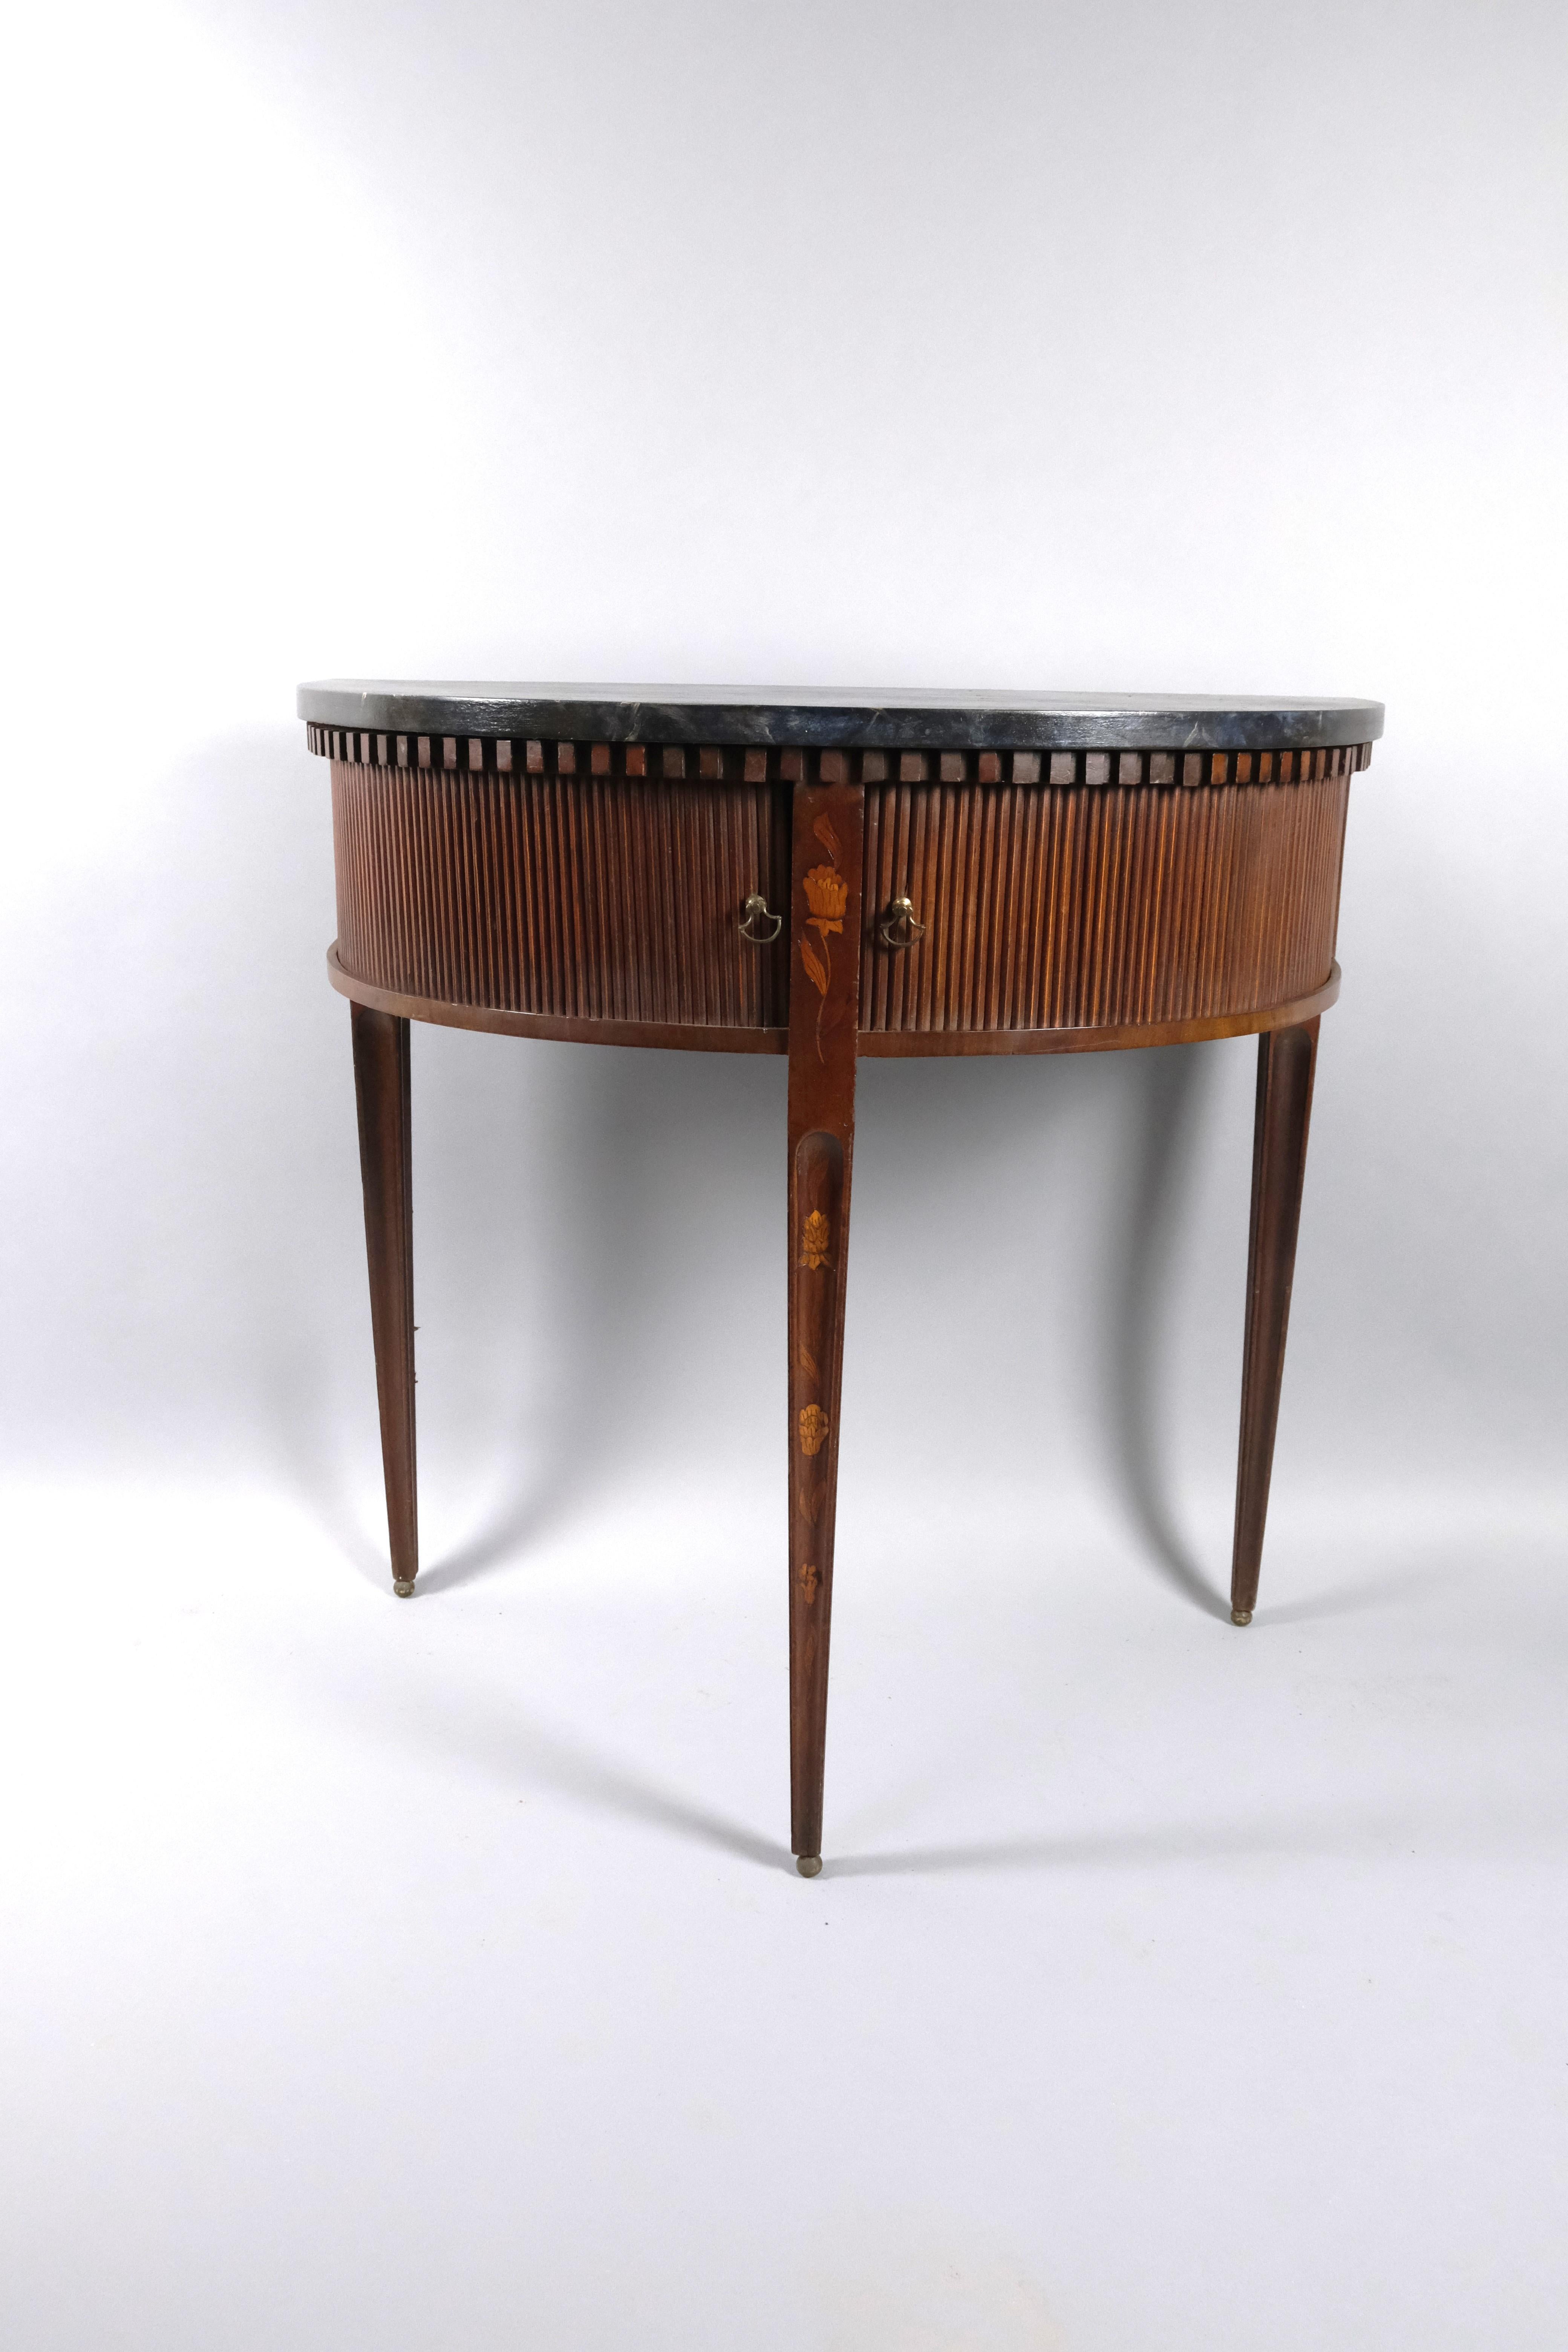 Hutton-Clarke Antiques is delighted to present a refined antique Dutch mahogany side table from around 1800. This elegant piece stands gracefully on tapered legs, meticulously adorned with inlays, providing a touch of sophistication to its design.